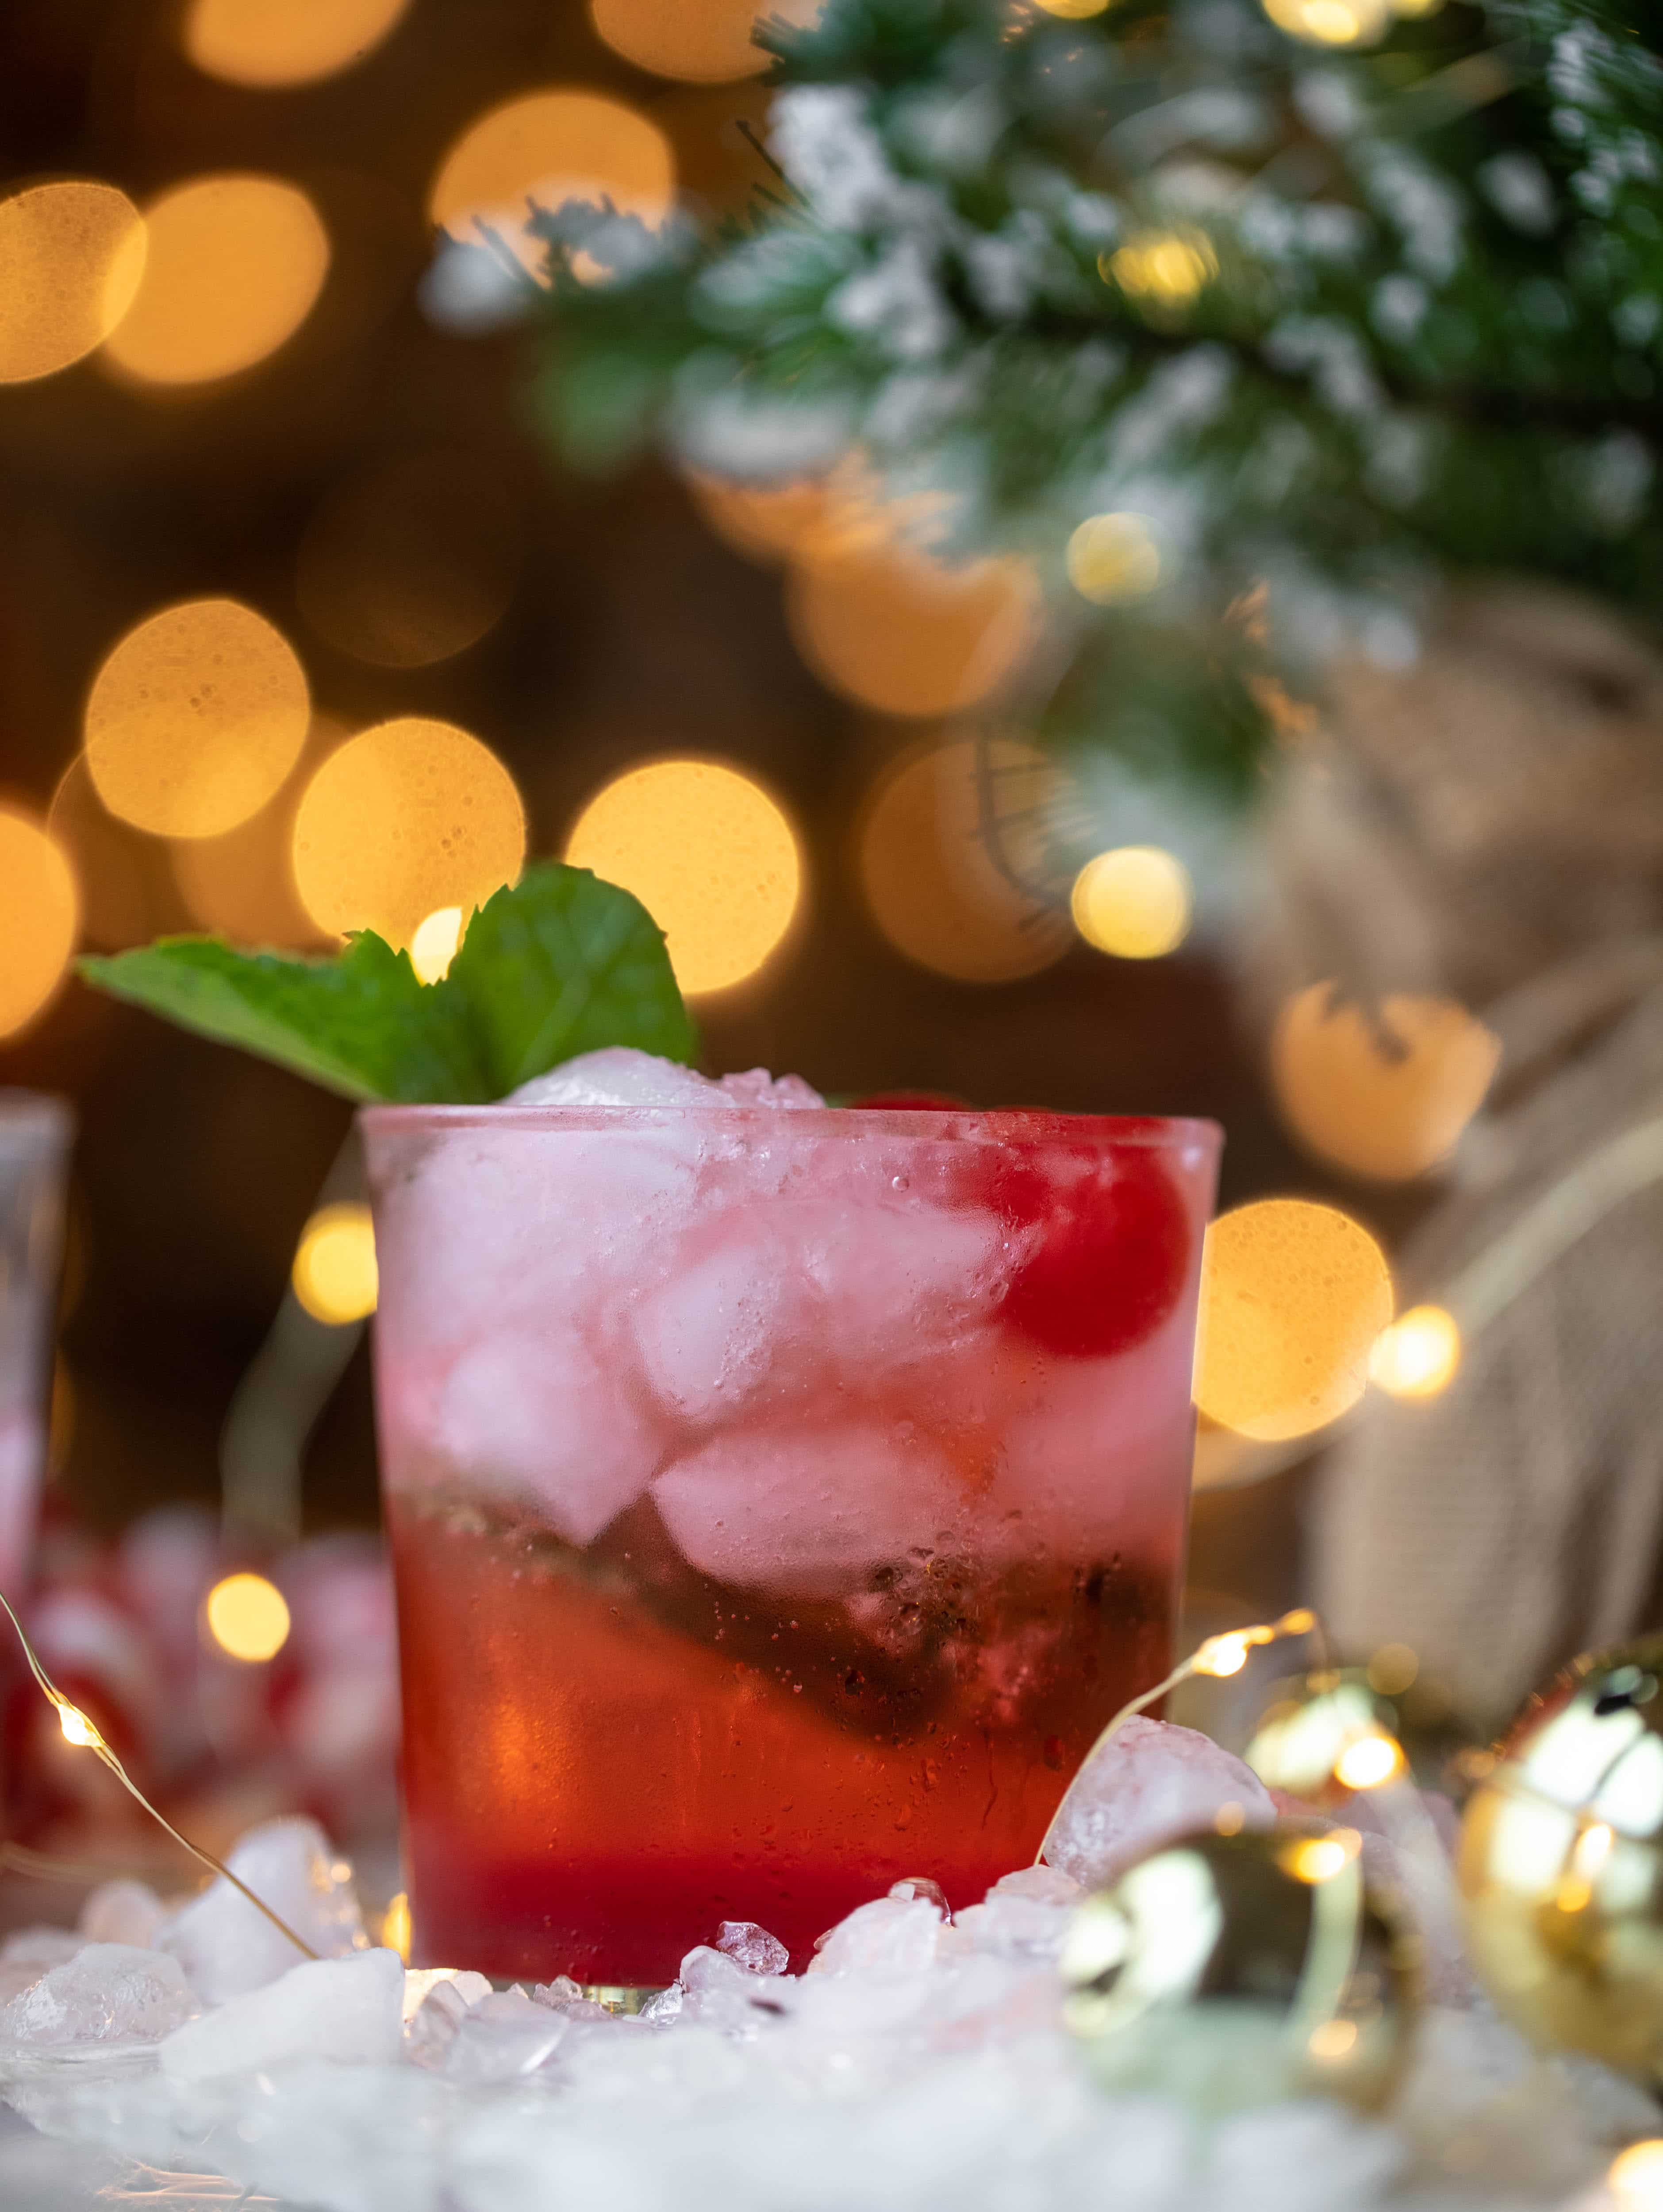 The merry cherry christmas cocktail is here! Vodka and cherries and mint, oh my! This is such a fun drink that can be made into a punch. It's delicious!